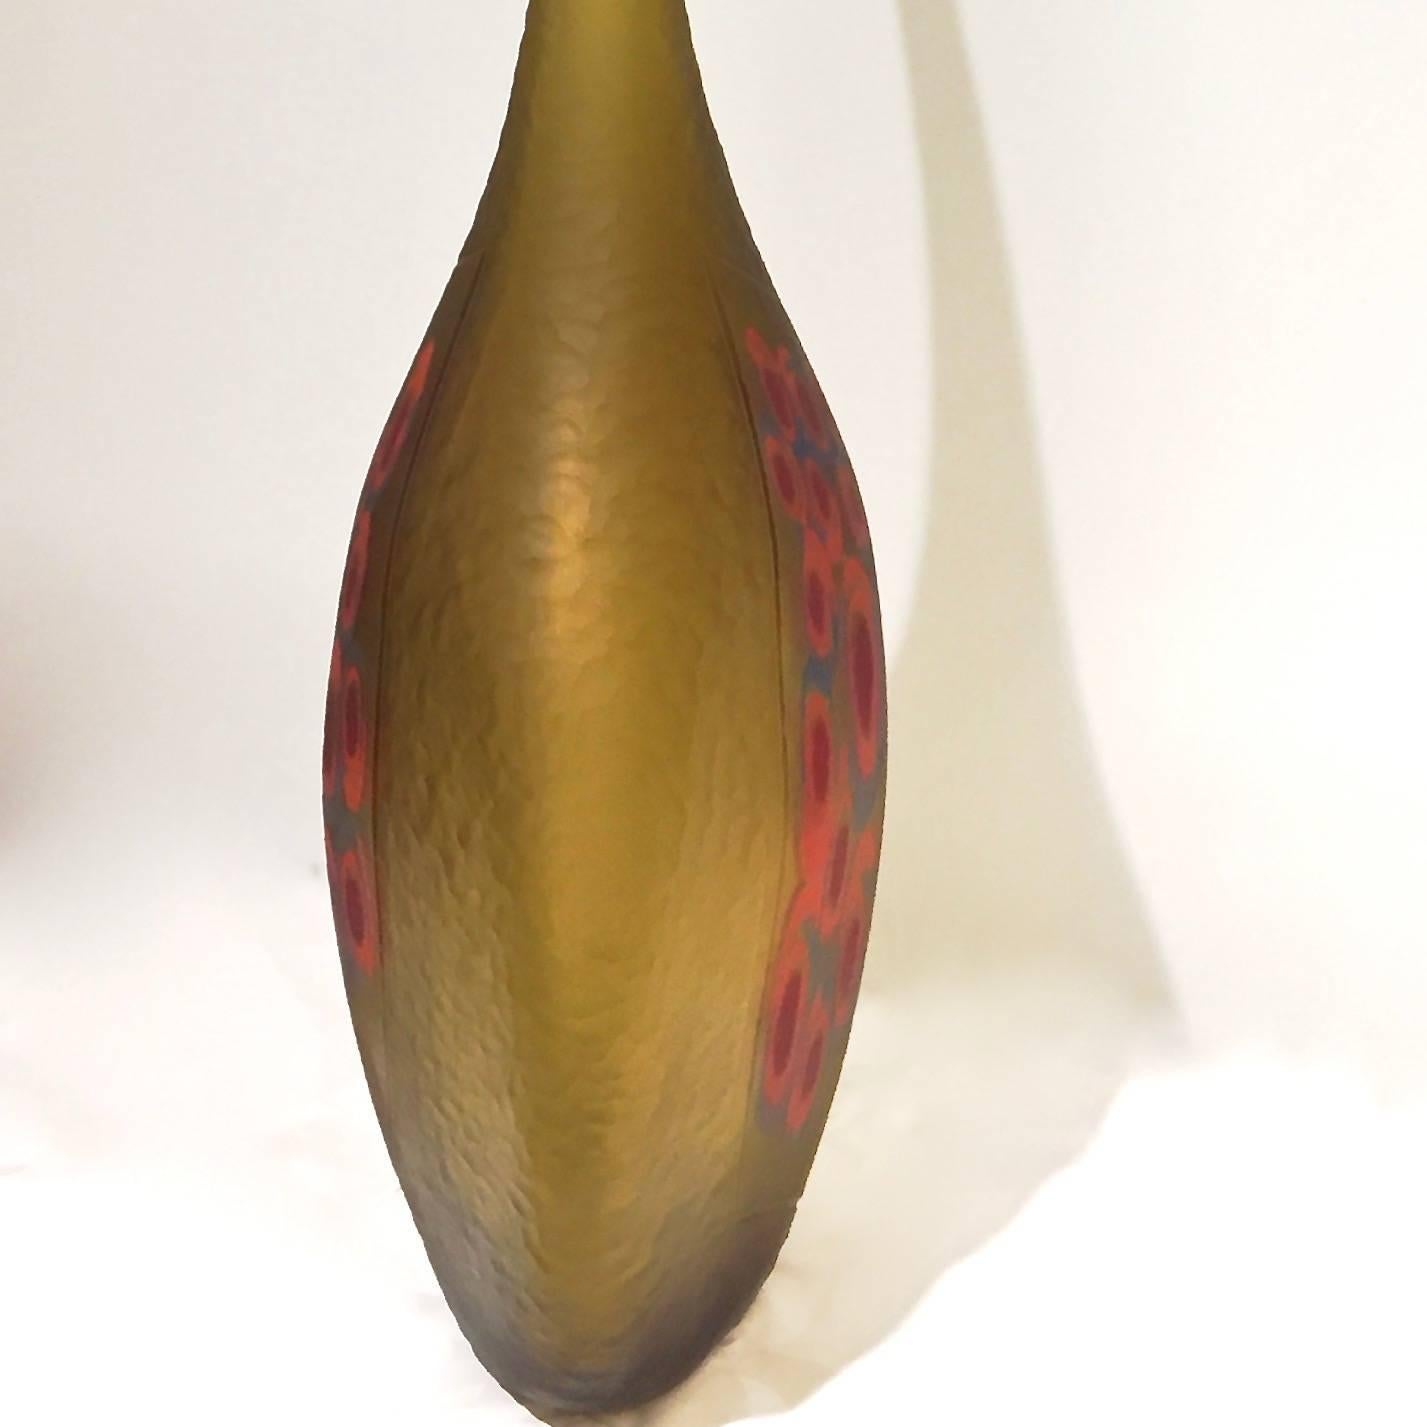 Dona Modern Art Glass Yellow Amber Sculpture Vase with Red and Blue Murrine 1